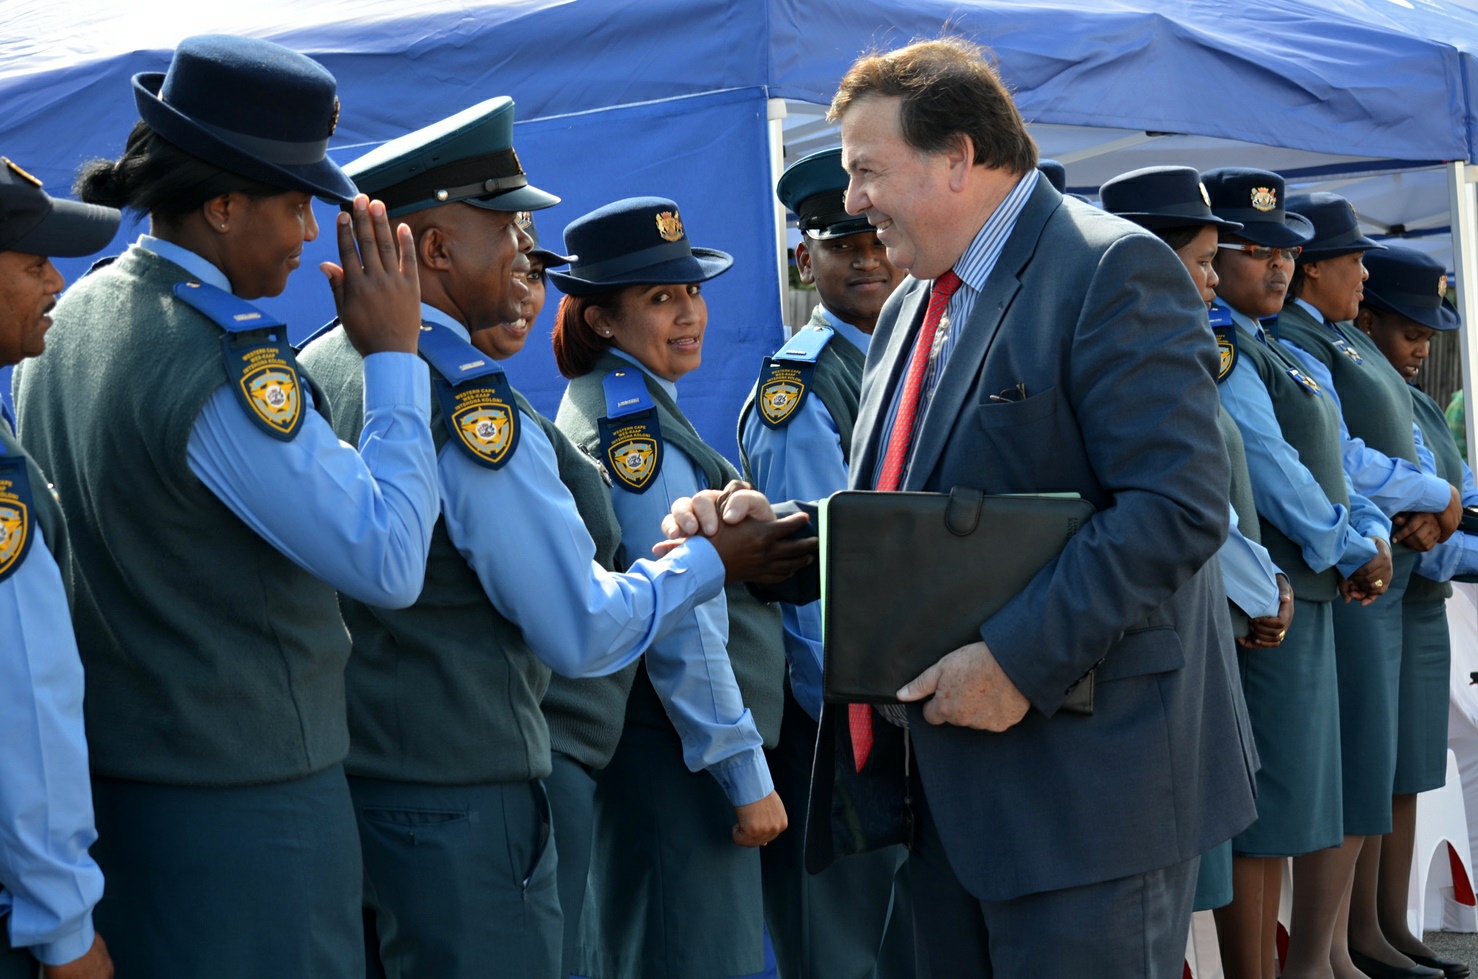 Minister Donald Grant greets traffic officers at the official opening of the new Knysna Traffic Centre.